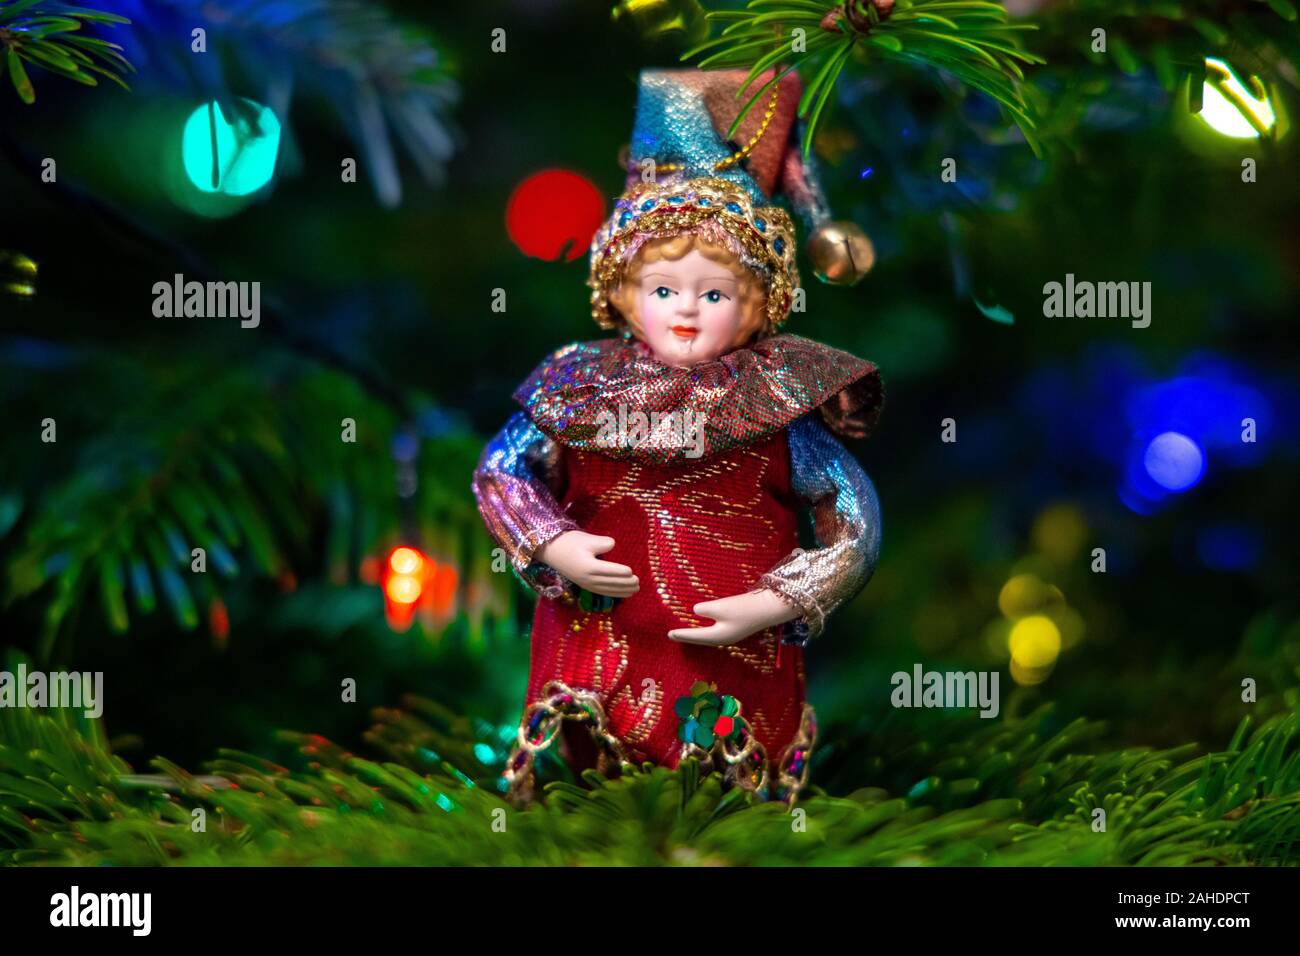 Vintage toys on a Christmas tree close-up, holiday traditions. Small depth of field Stock Photo